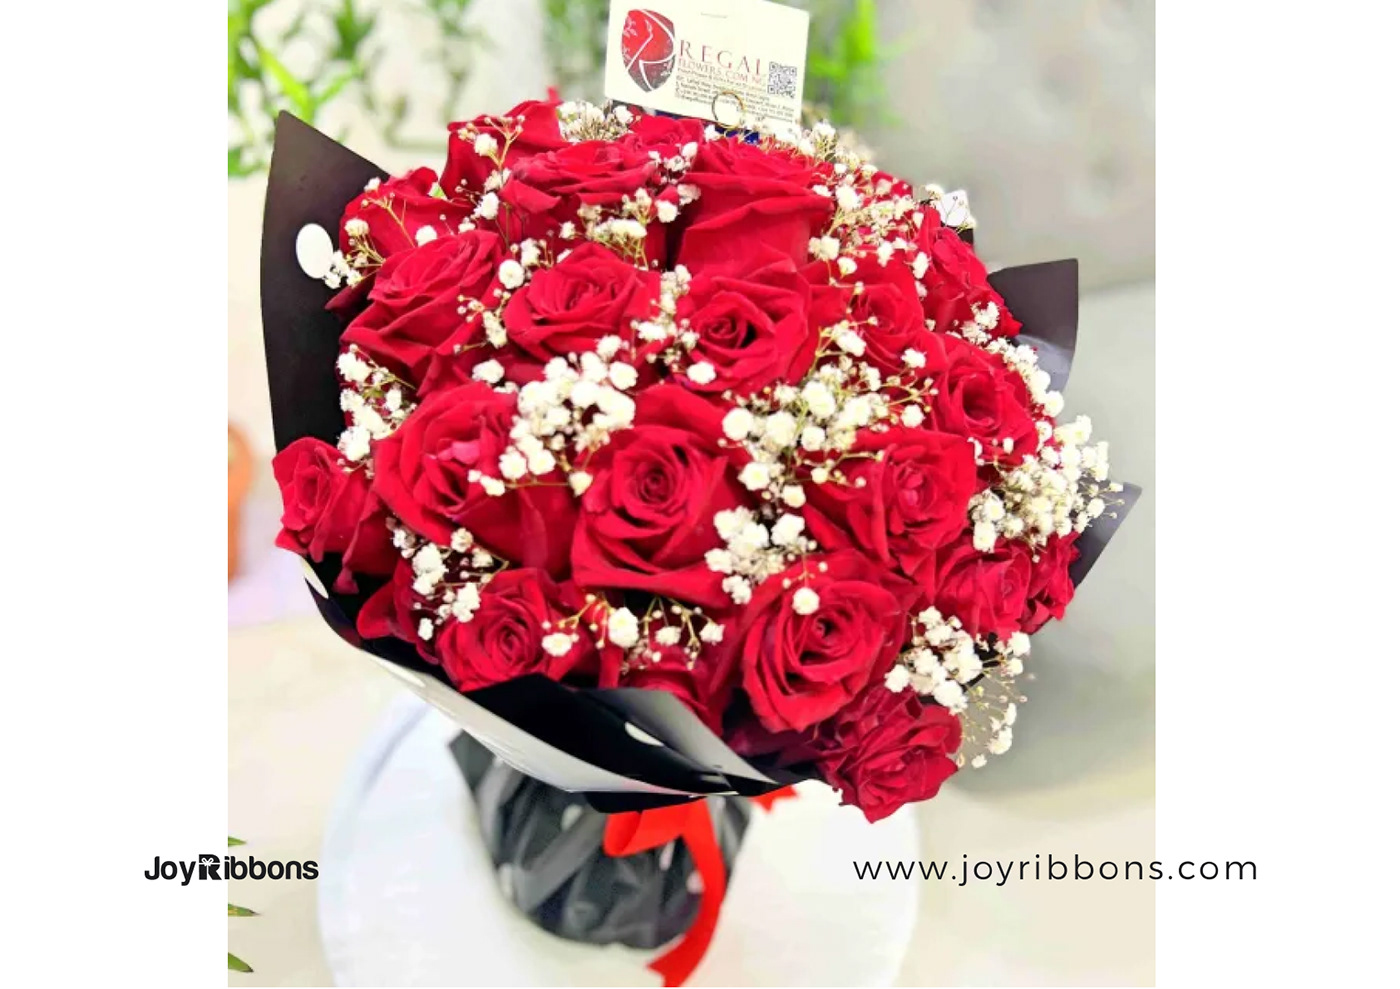 Shop valentine gifts for you and your lover(s) on JoyRibbons. We deliver to anywhere in Nigeria.